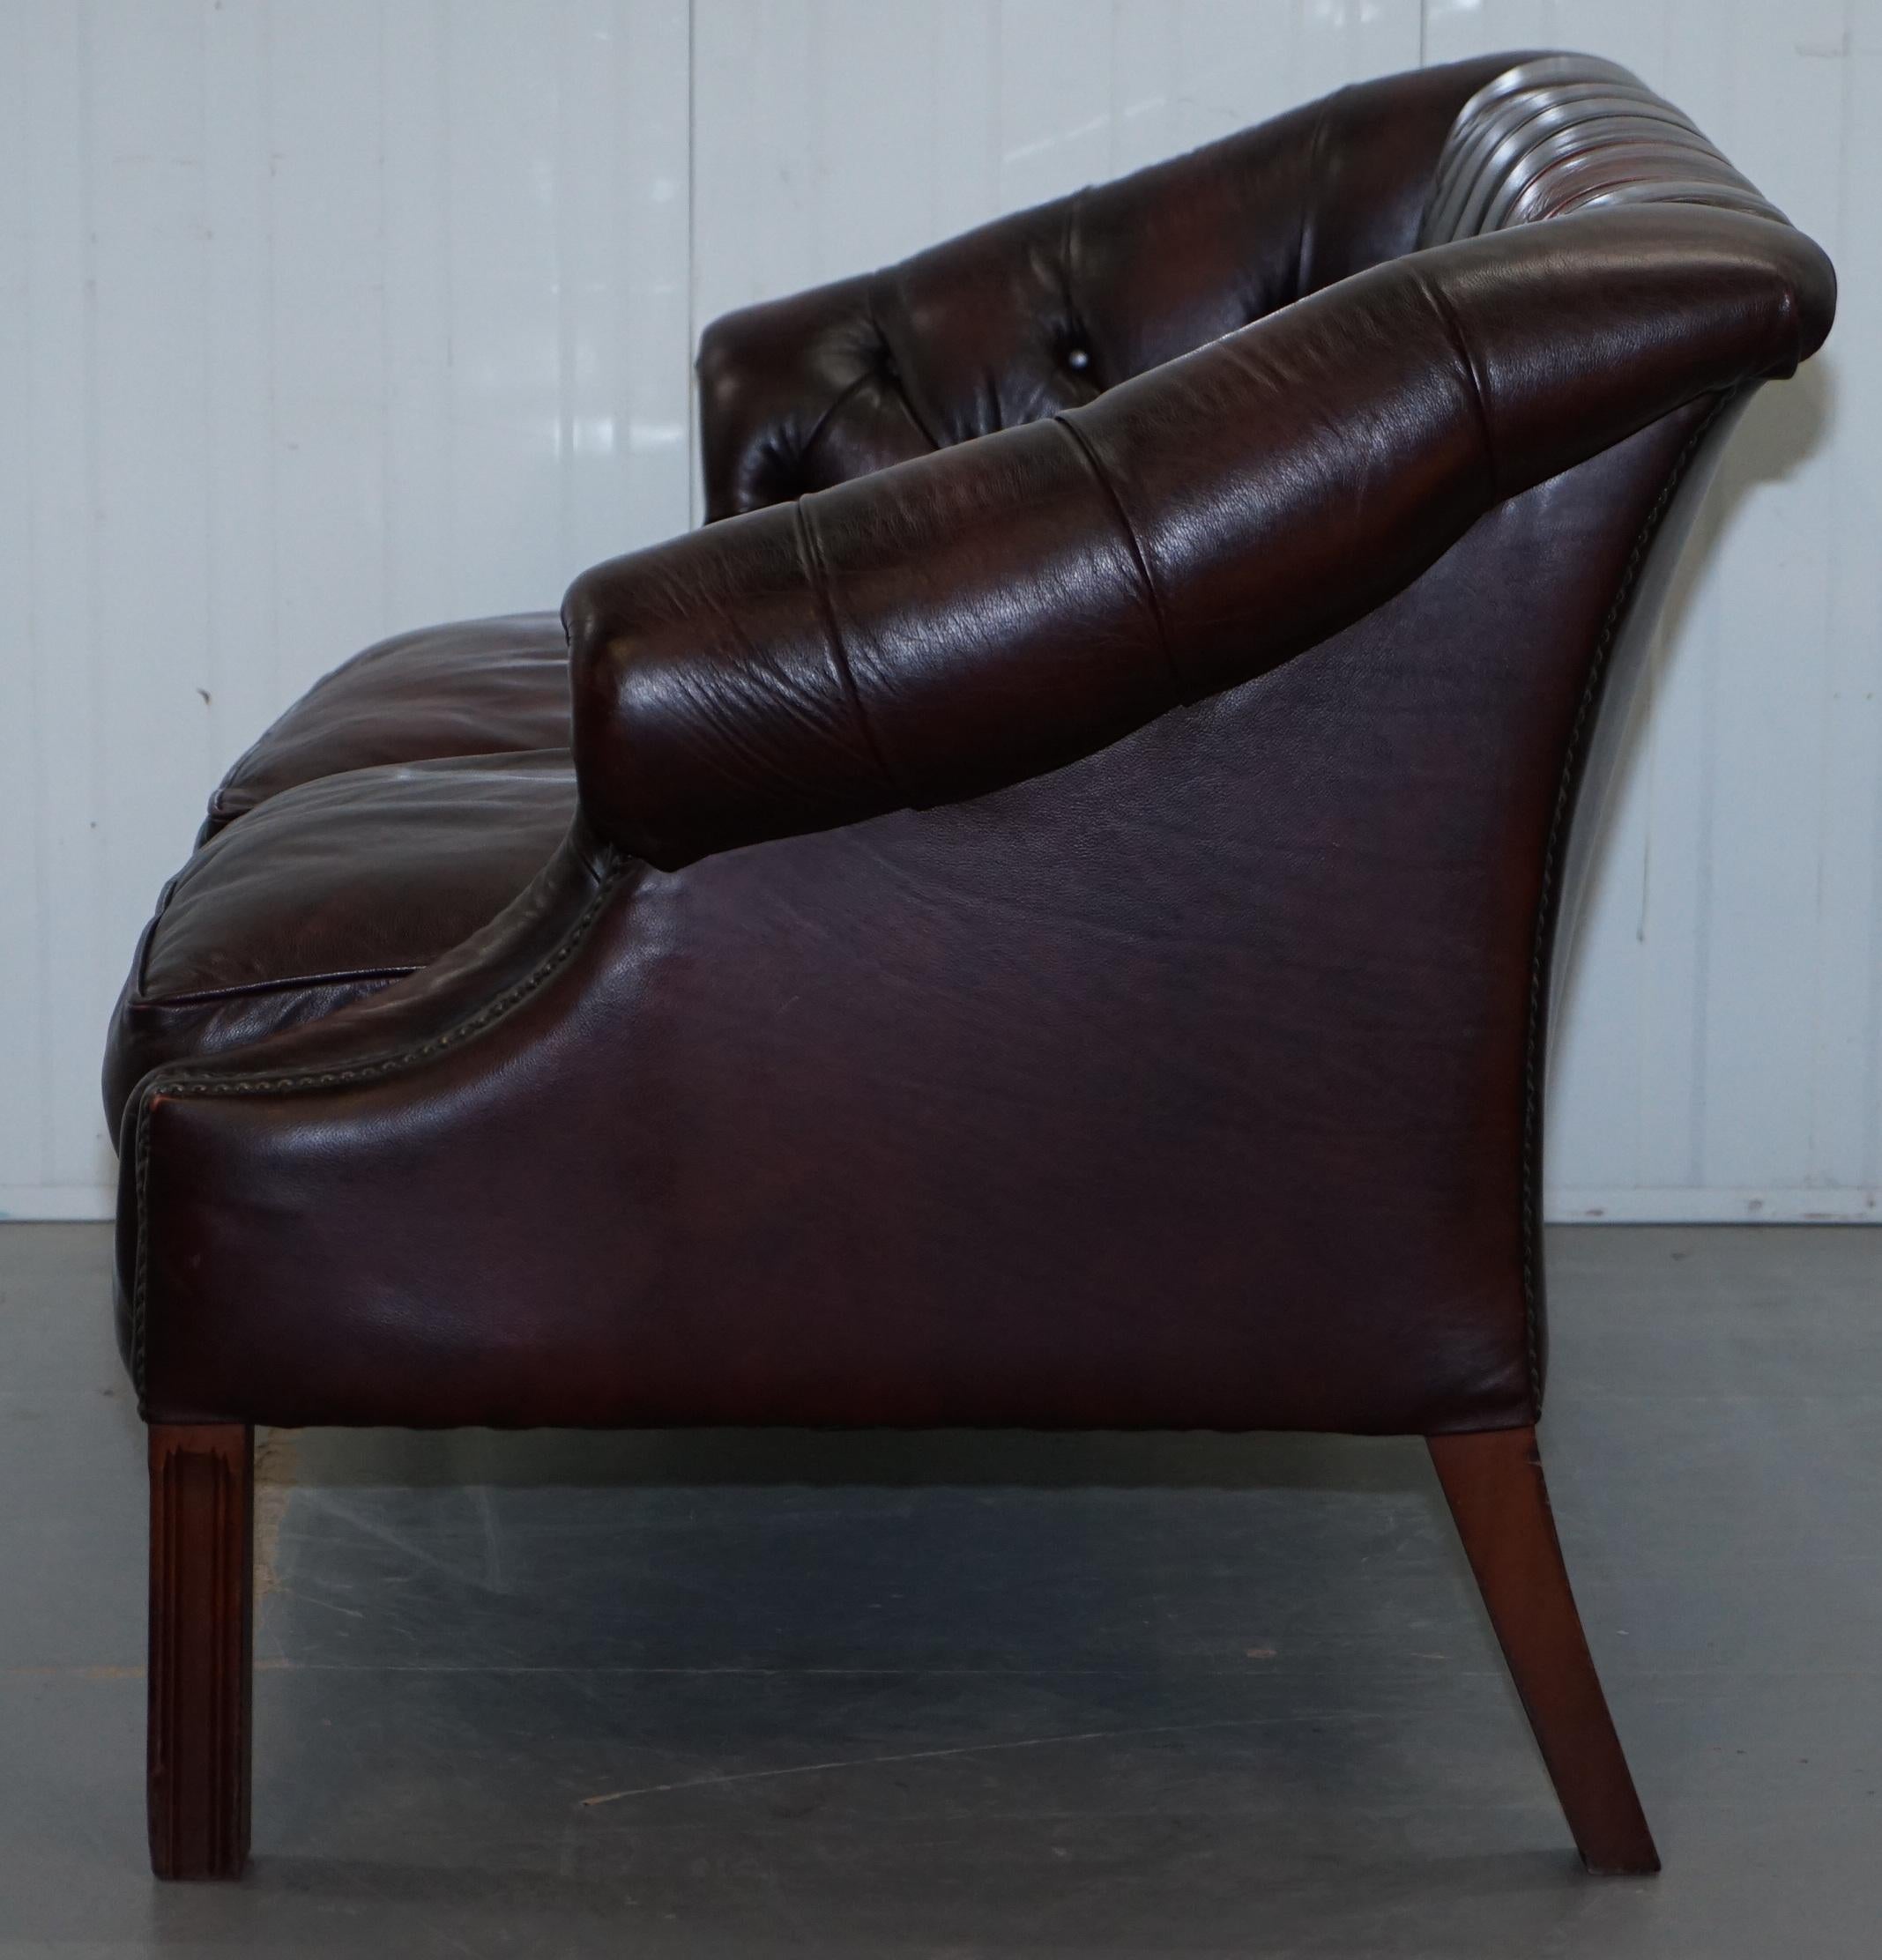 Chesterfield Lutyen's Style Viceroy's Oxblood Leather Two-Seat Sofa 12